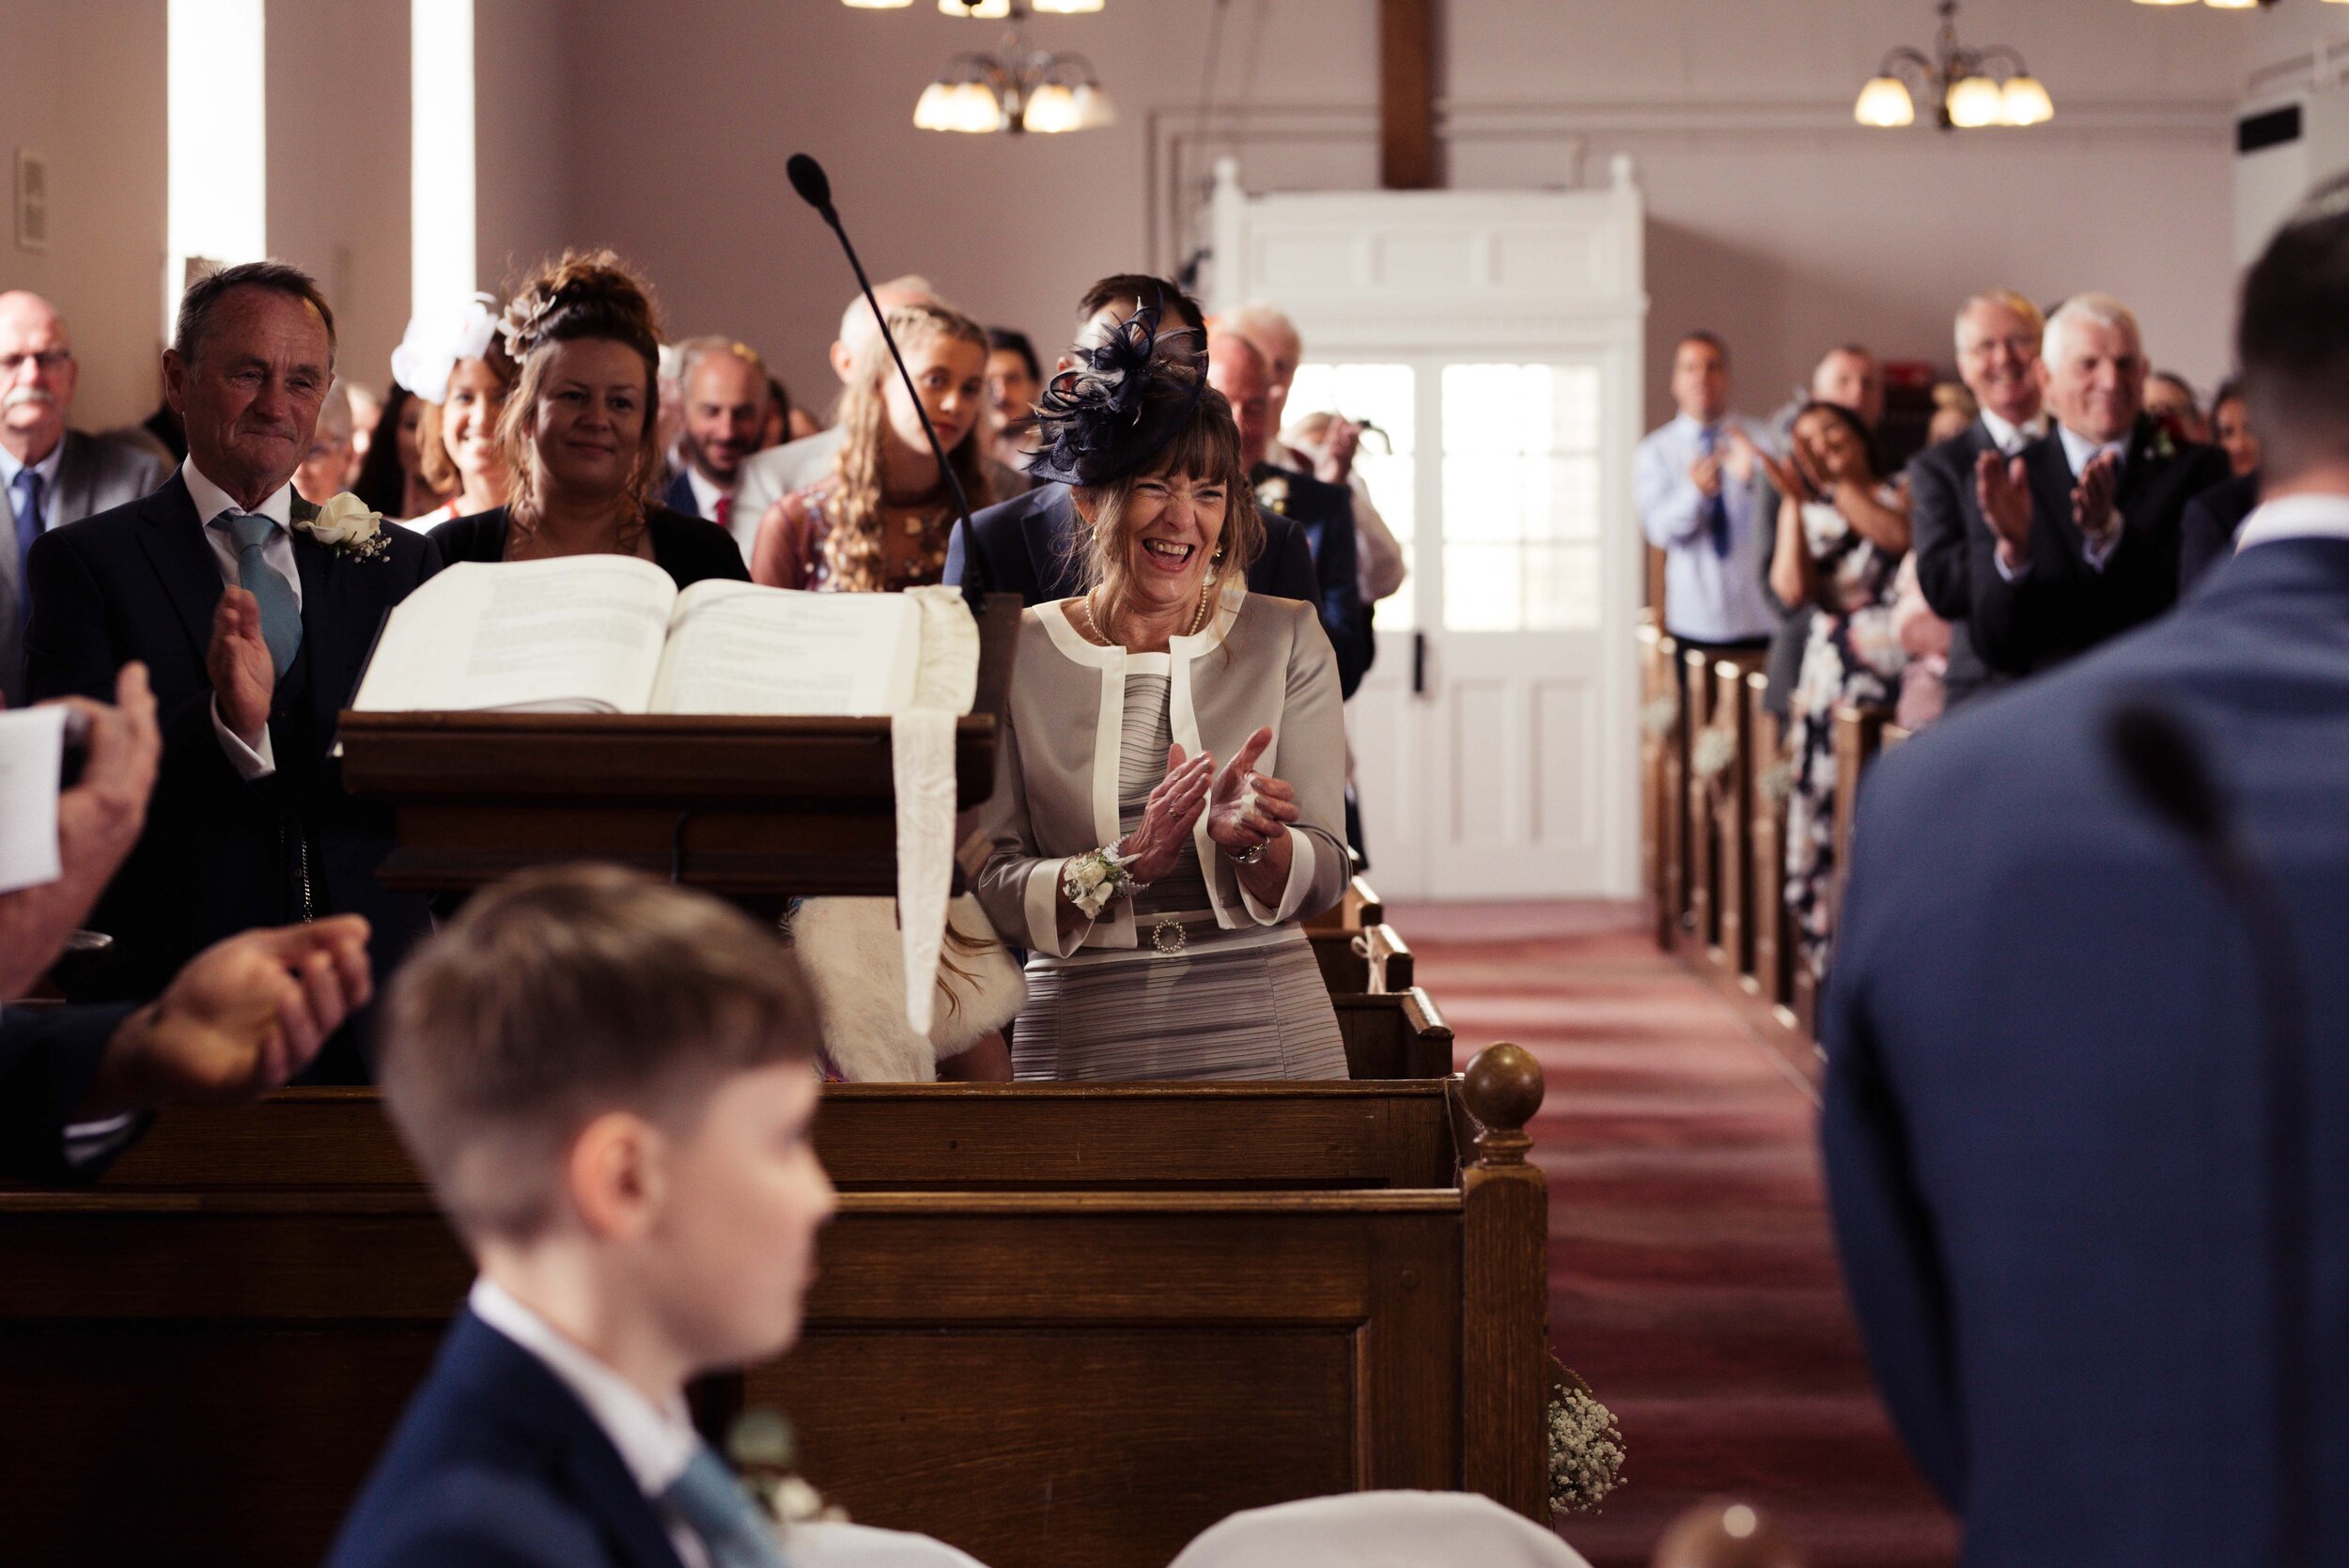 Mother of the groom looks excited during the wedding service